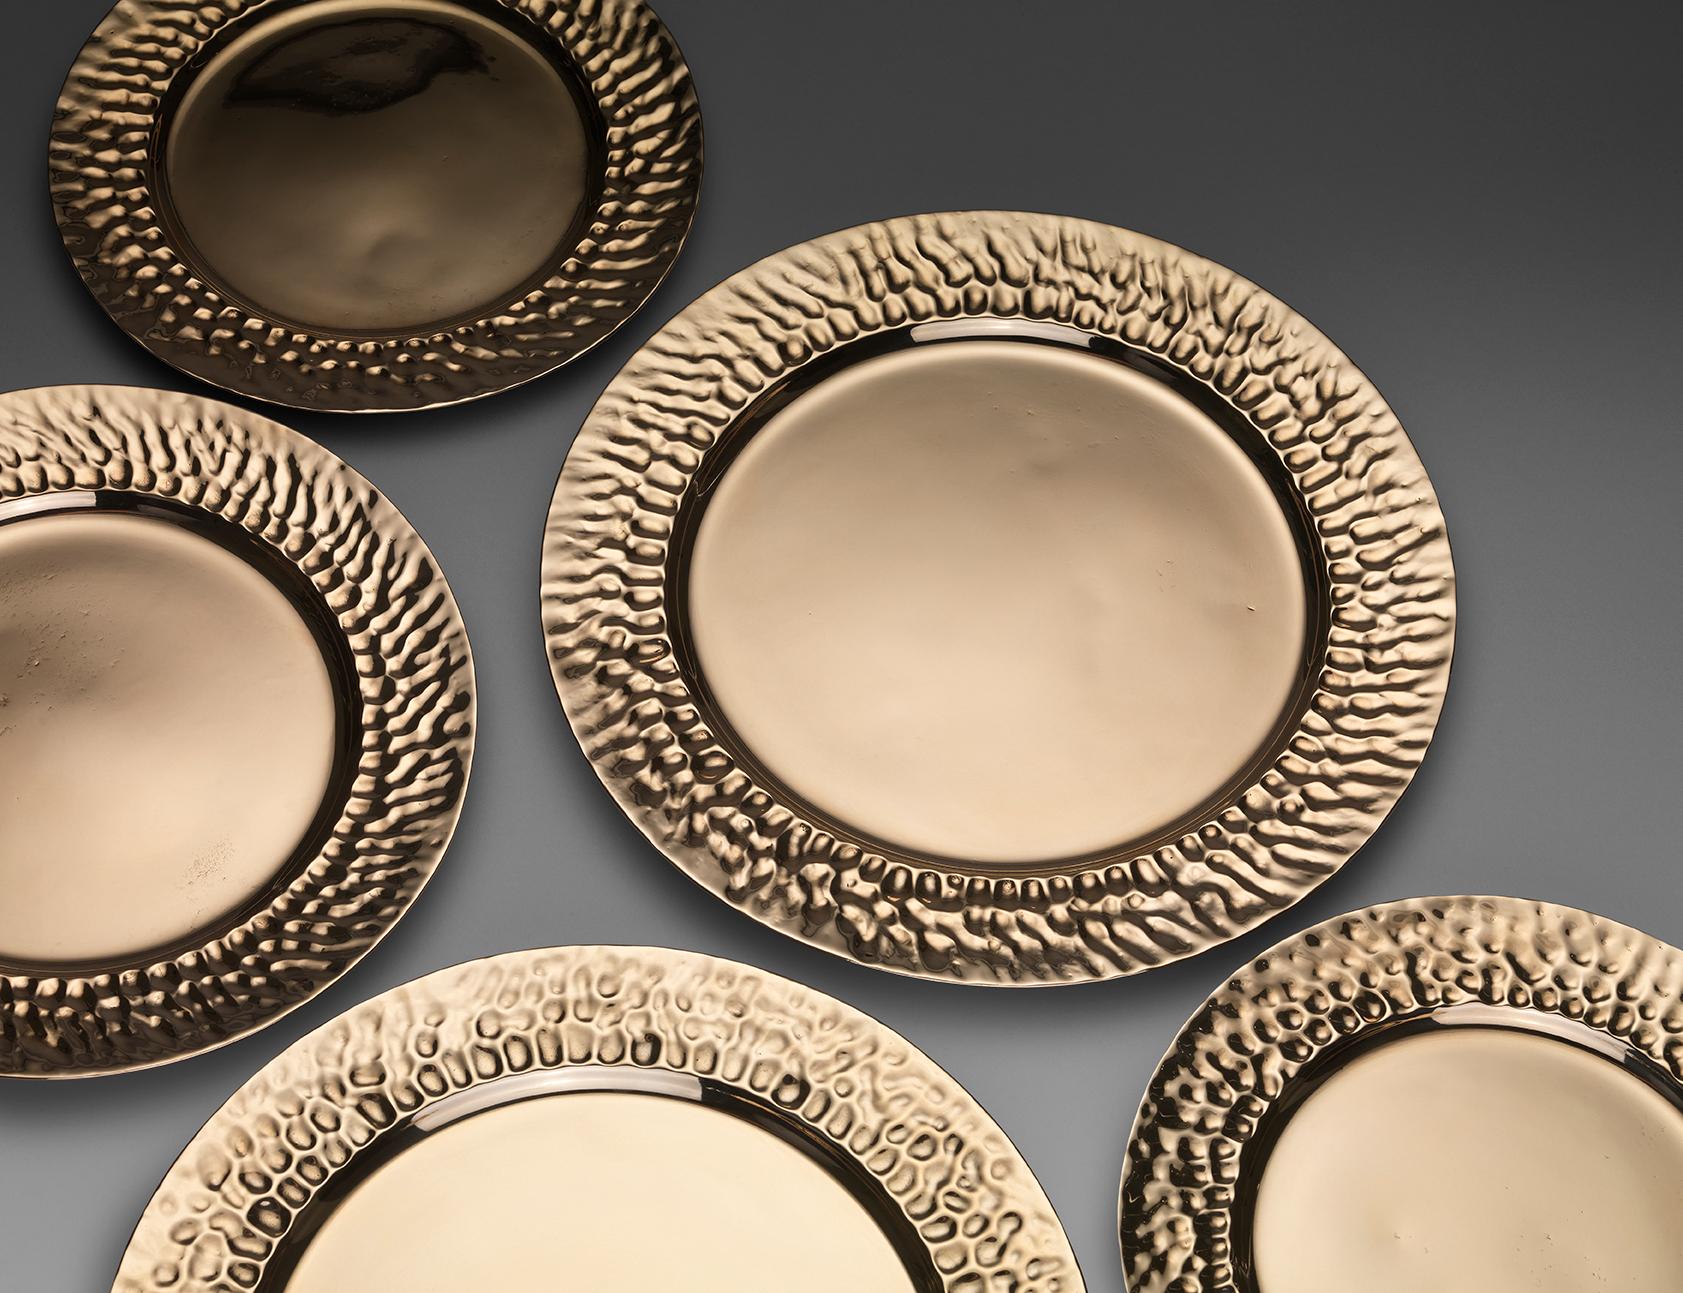 A bronze dinner plate with sculptural lip. Cast by lost wax technique. The plate can be used functionally or decoratively. Great care has been taken with the weight and thickness. They are as thin as porcelain and the weight is satisfying but not